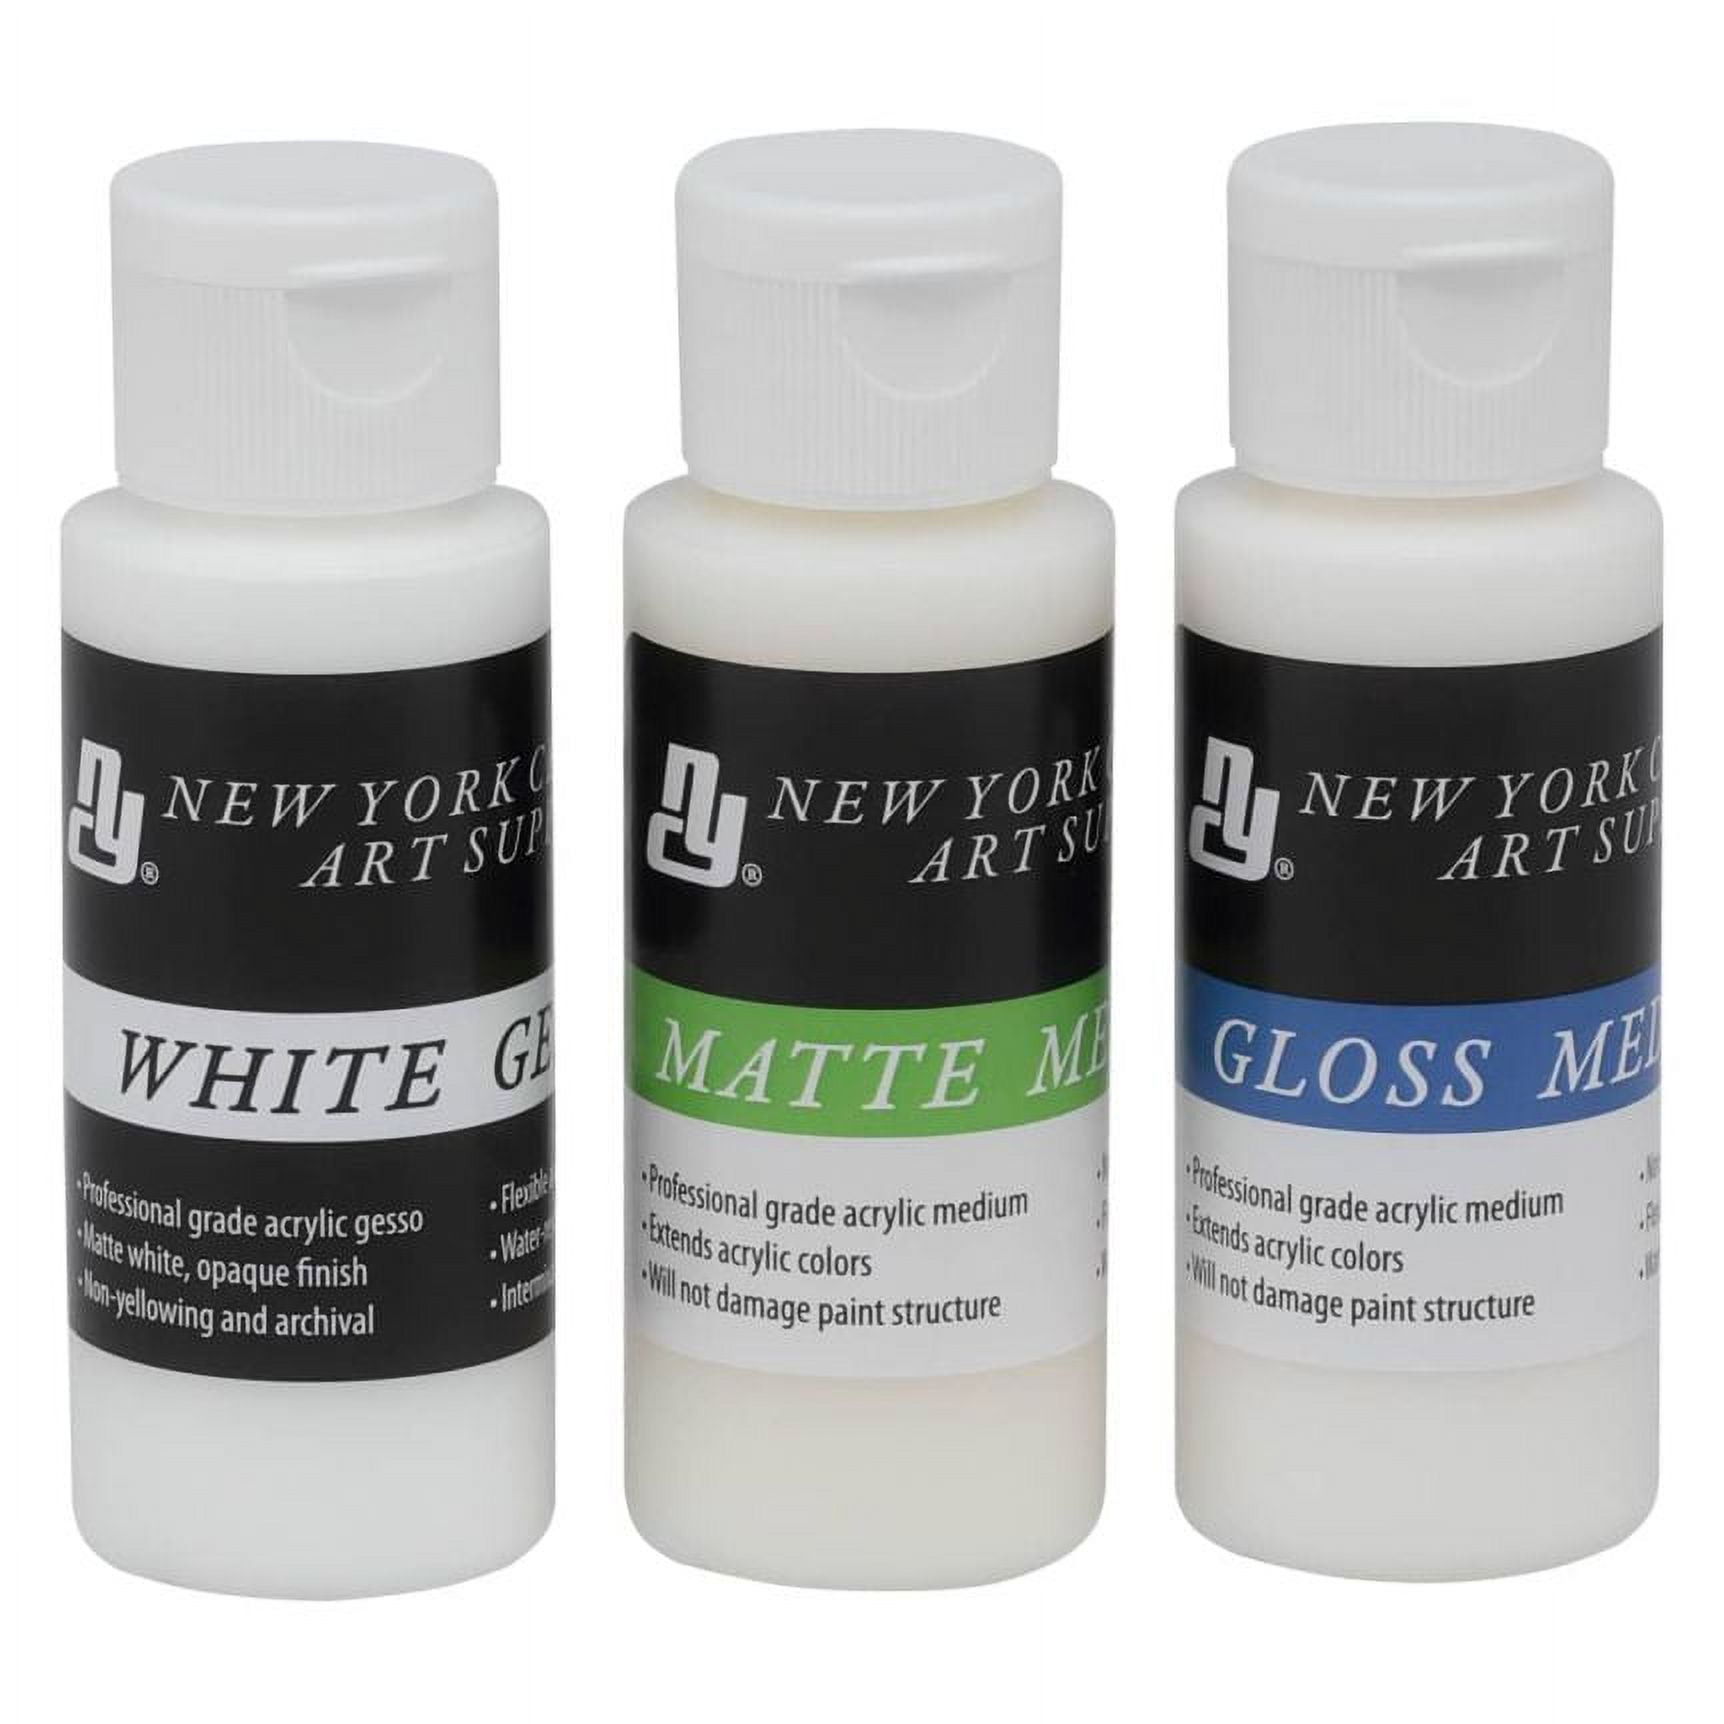 New York Central Acrylic Mediums - Non-Cracking Professional Grade Paint  Medium for Heavy Body Paint, Collage, Mixed Media, Photo Transfers & More!  